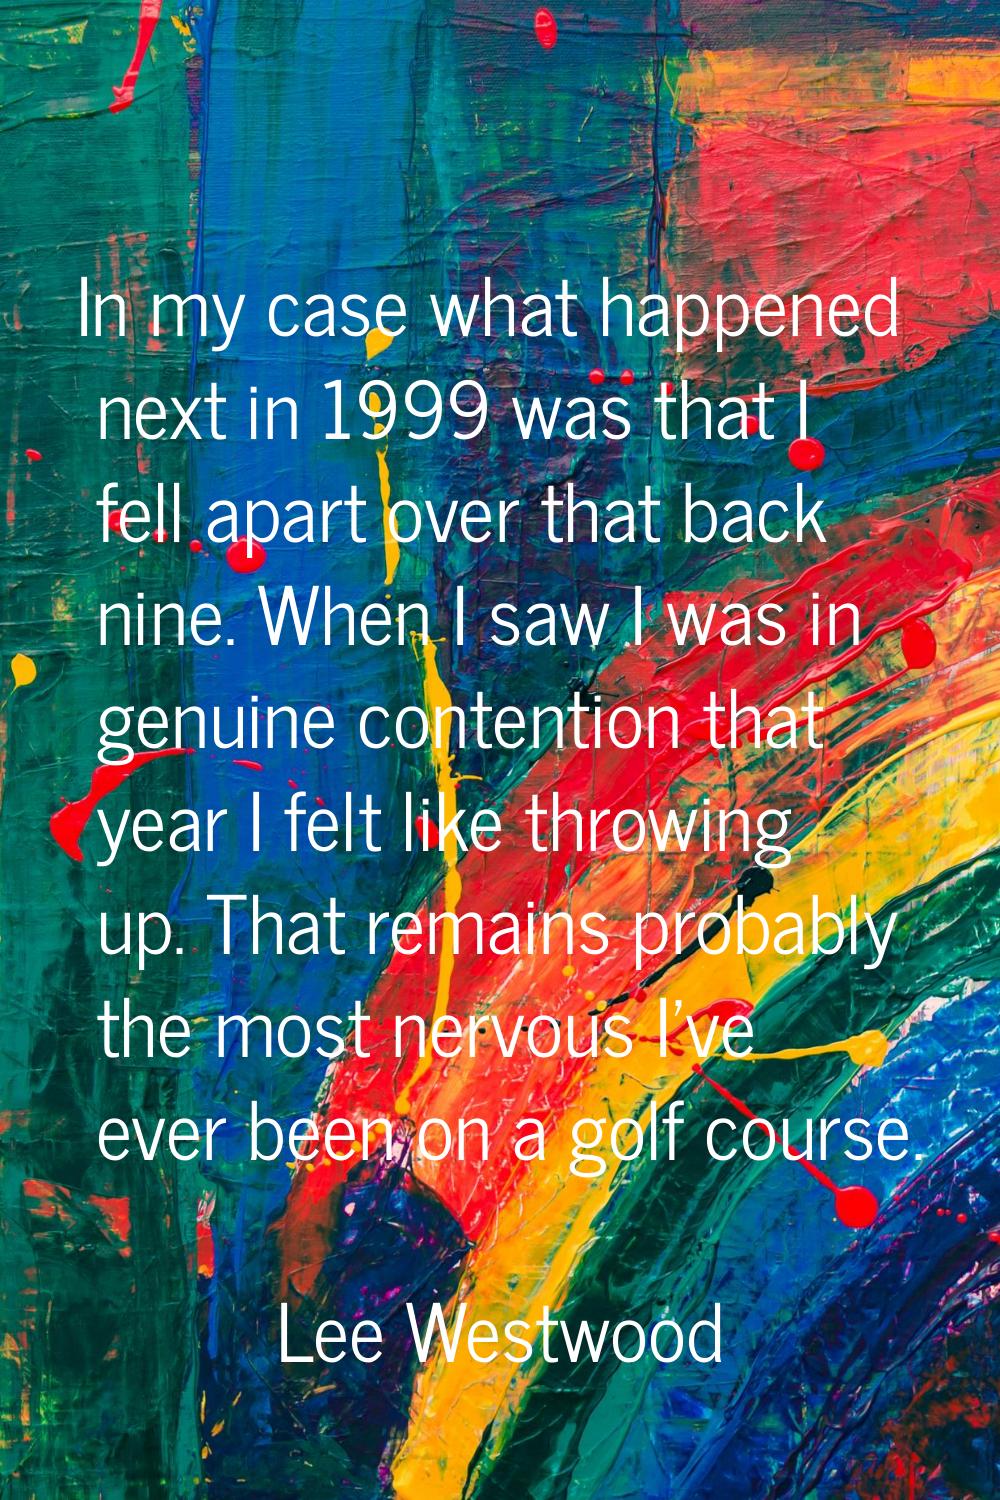 In my case what happened next in 1999 was that I fell apart over that back nine. When I saw I was i